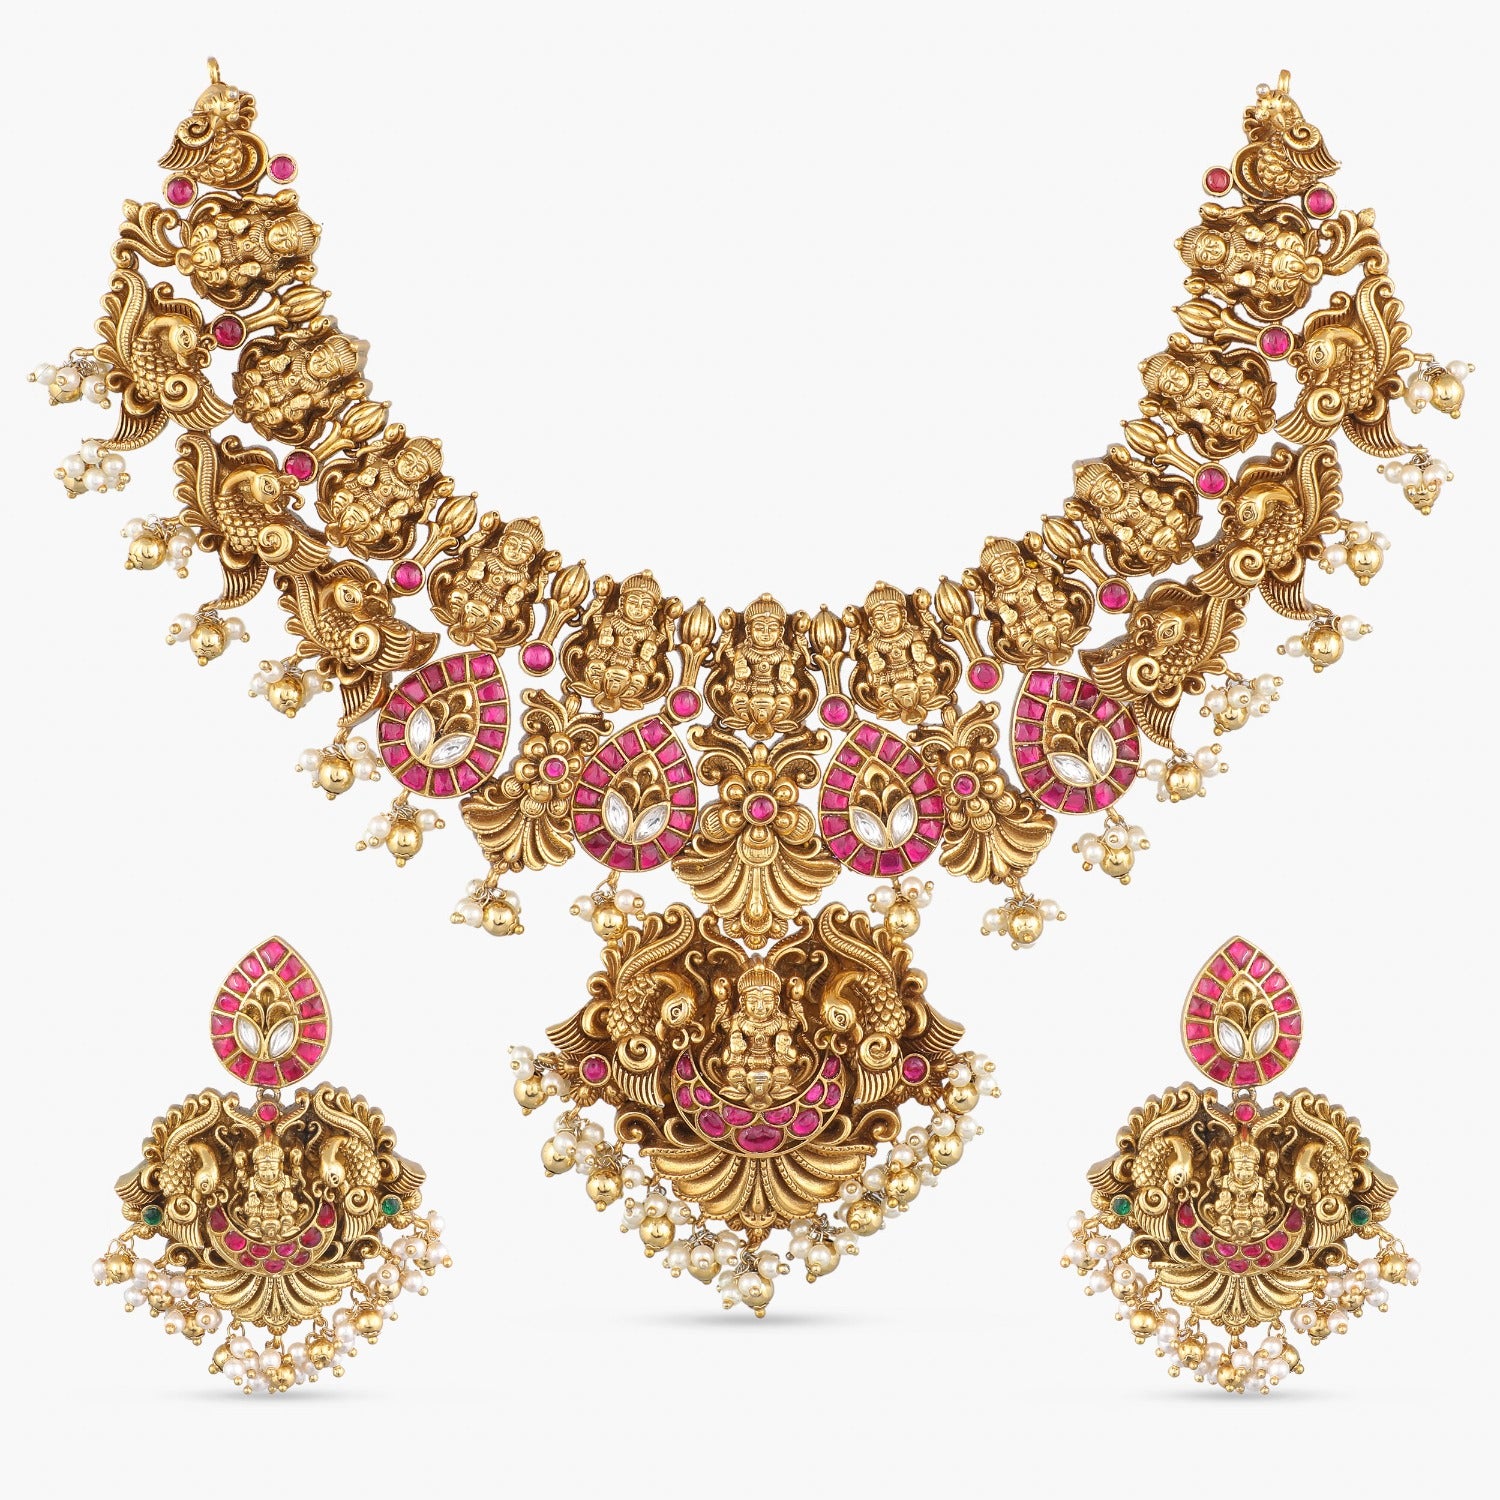 Chitra Temple Antique Necklace